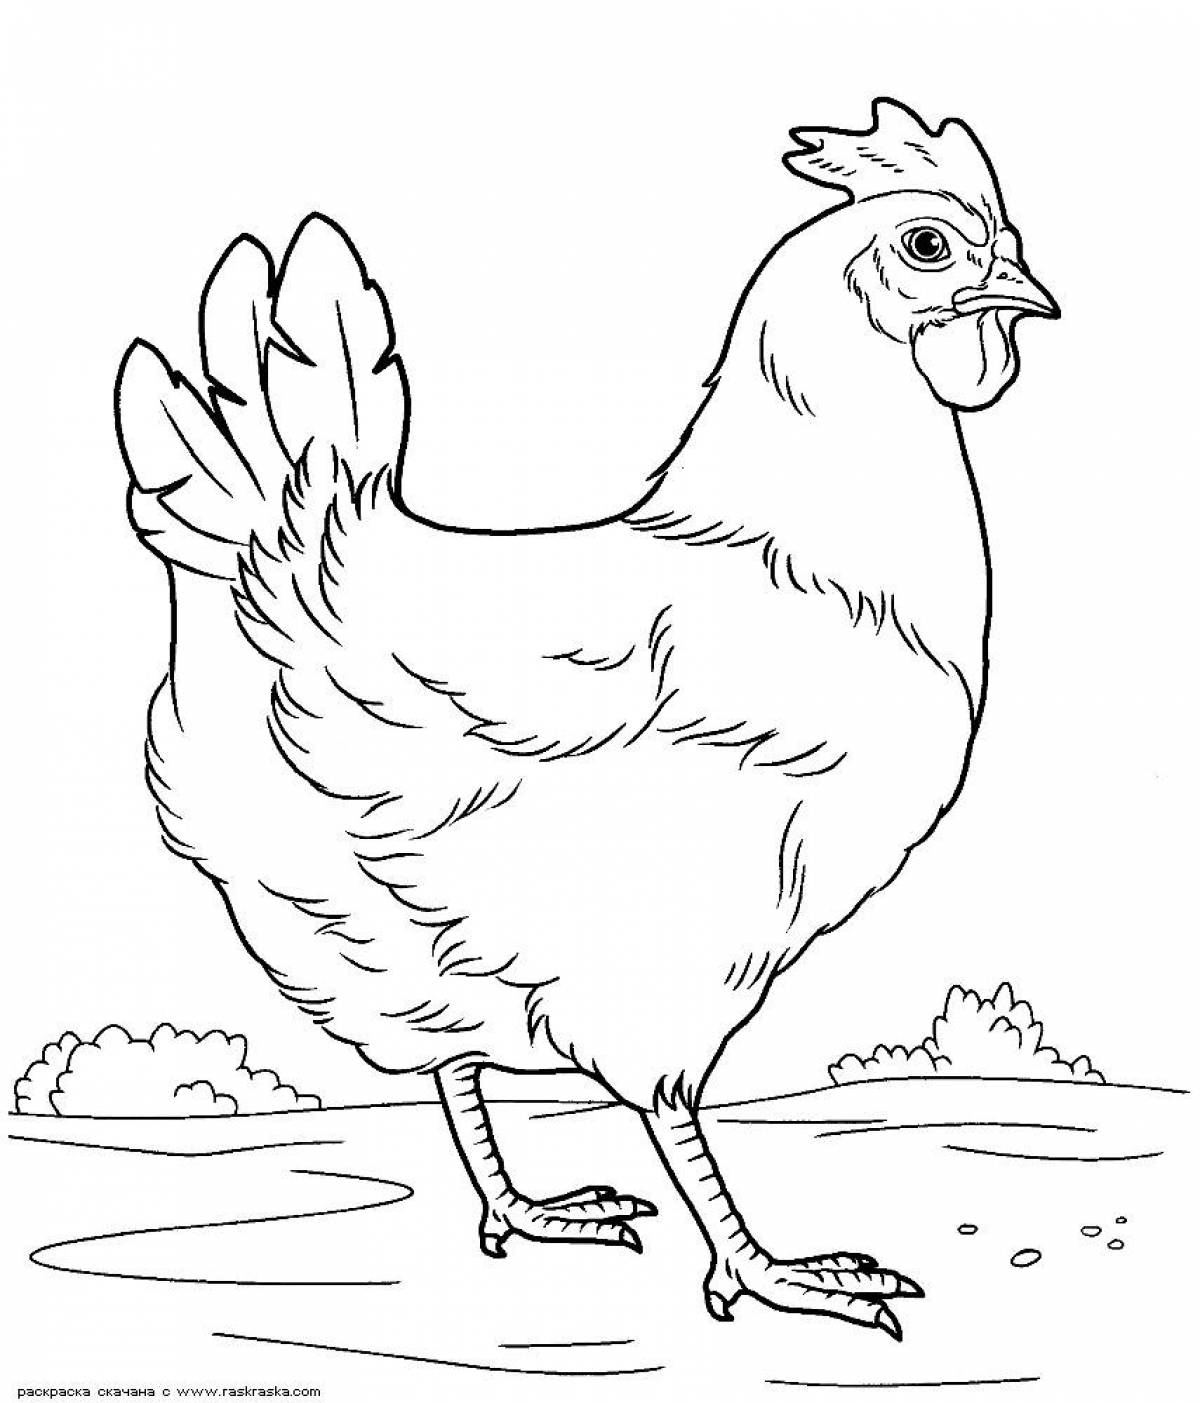 Sunny chicken coloring page for kids